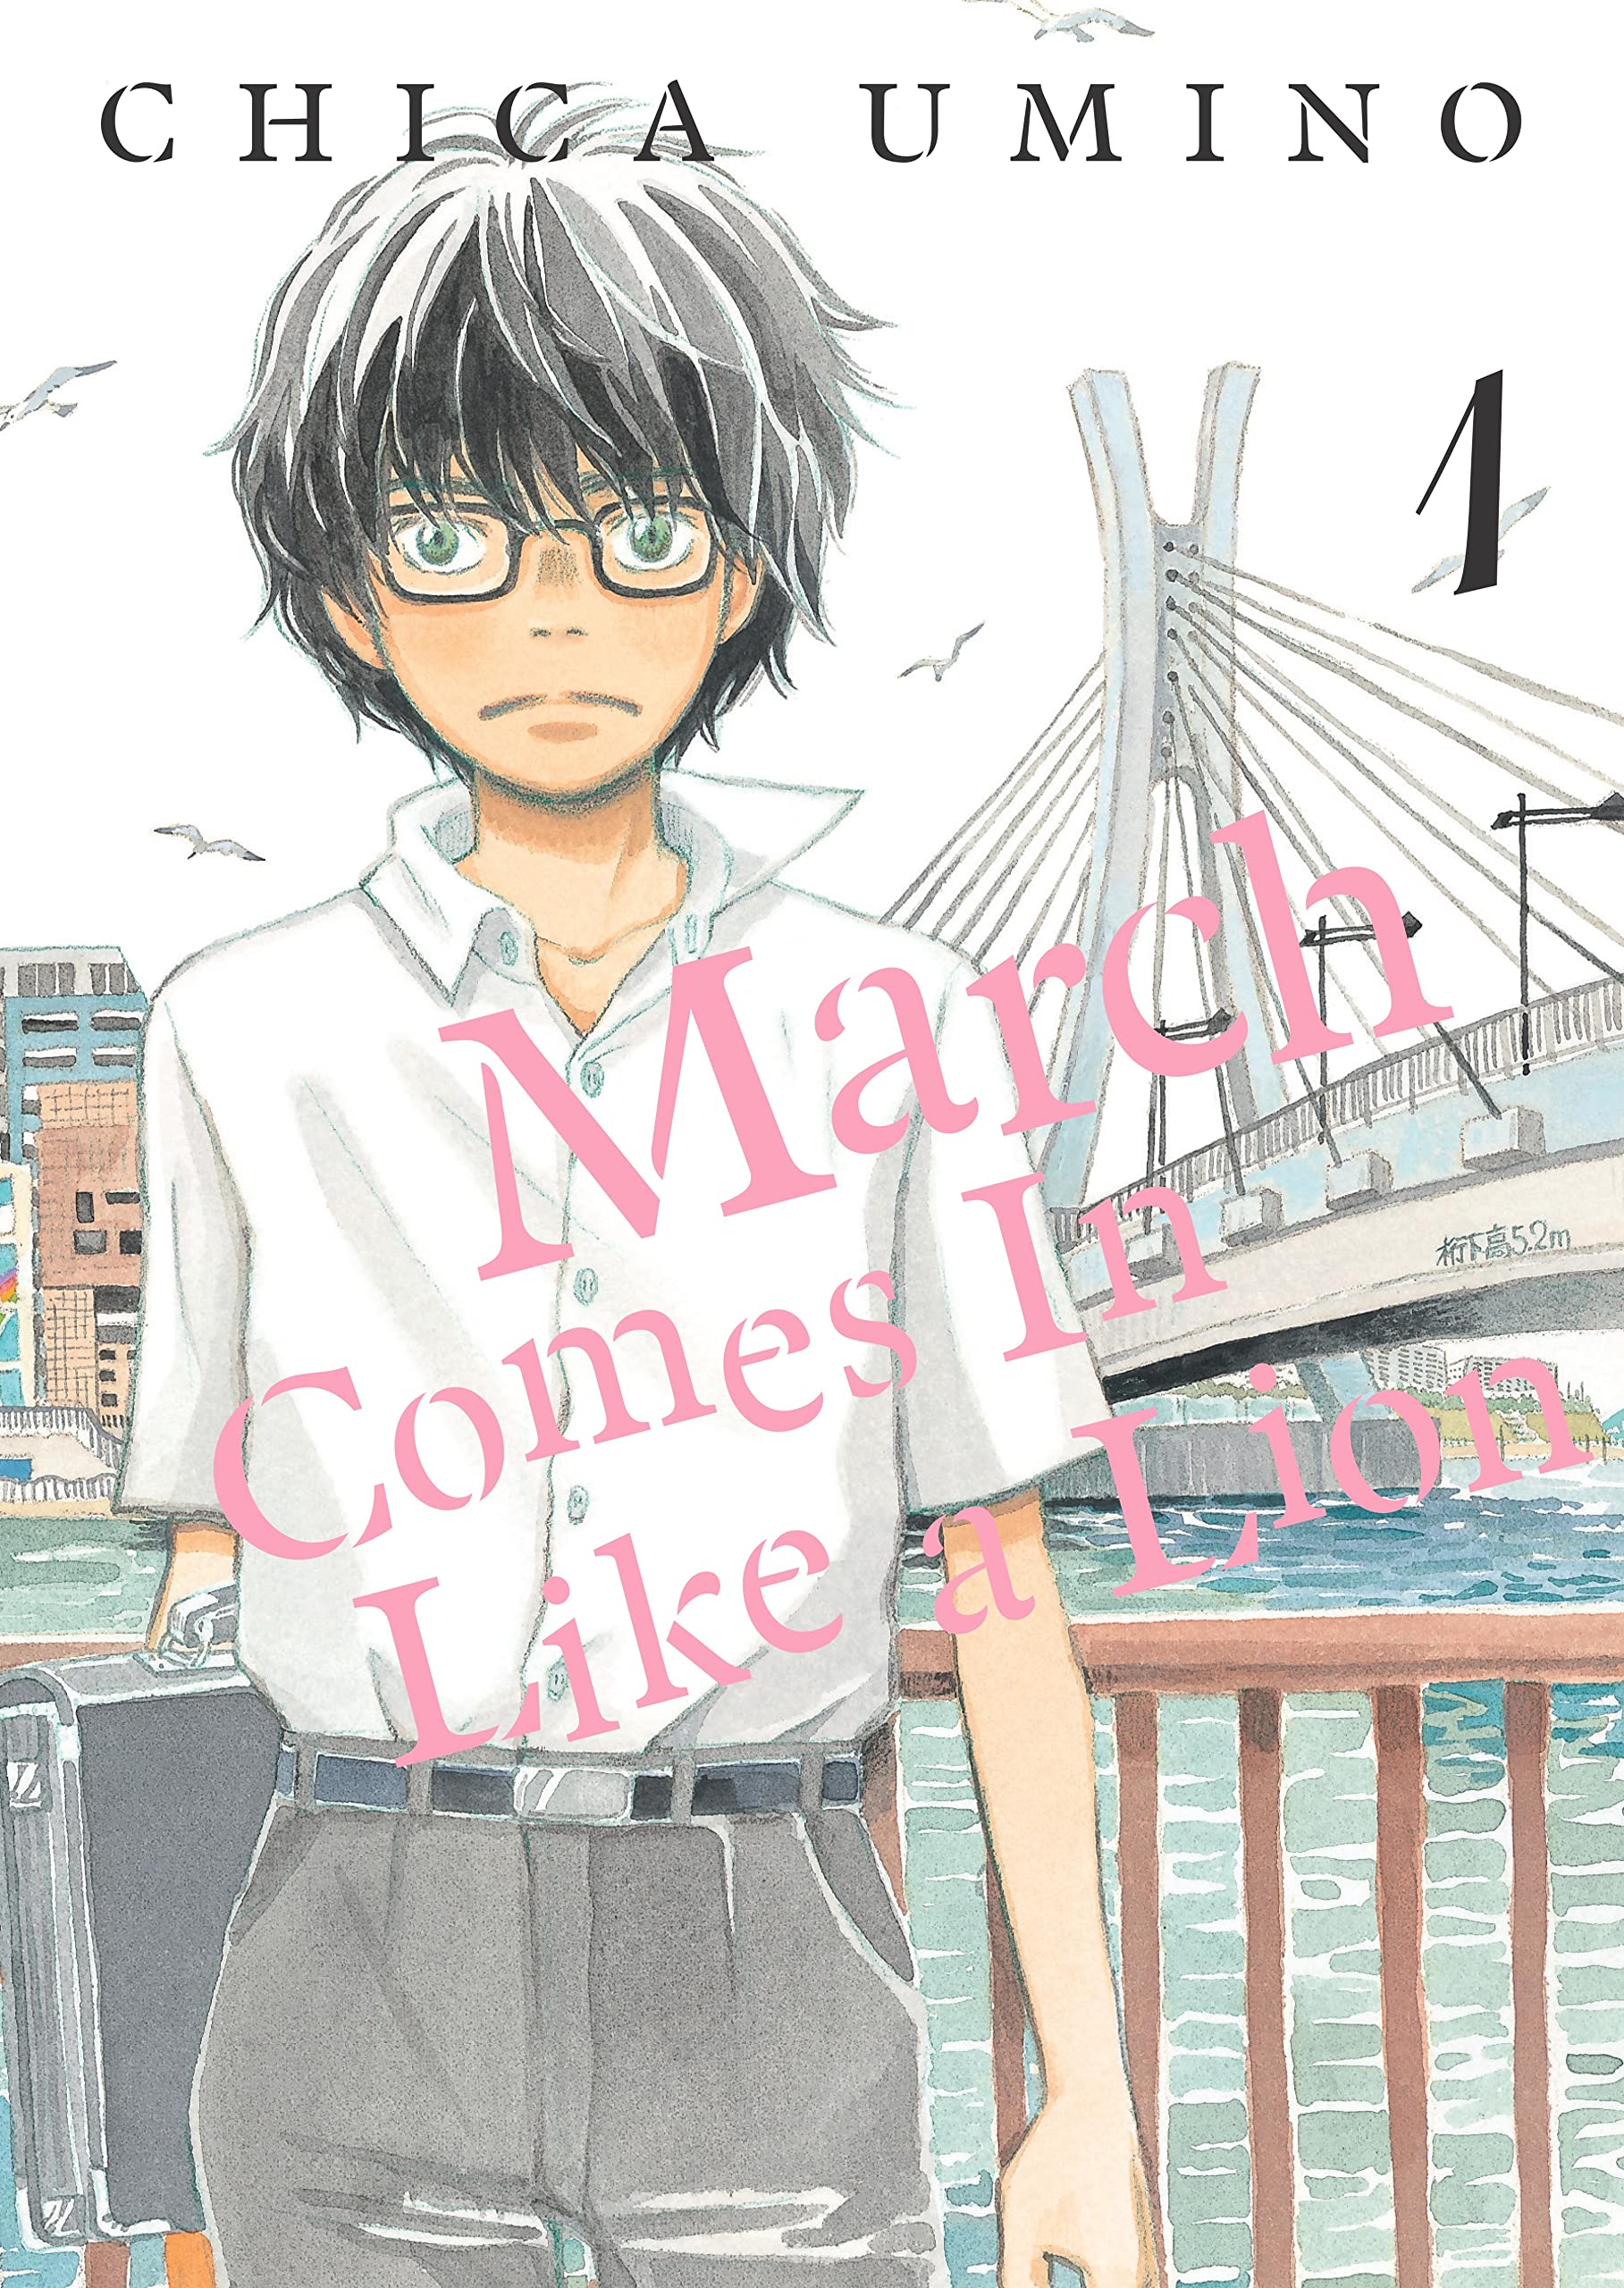 March Comes in Like a Lion Manga Volume 1